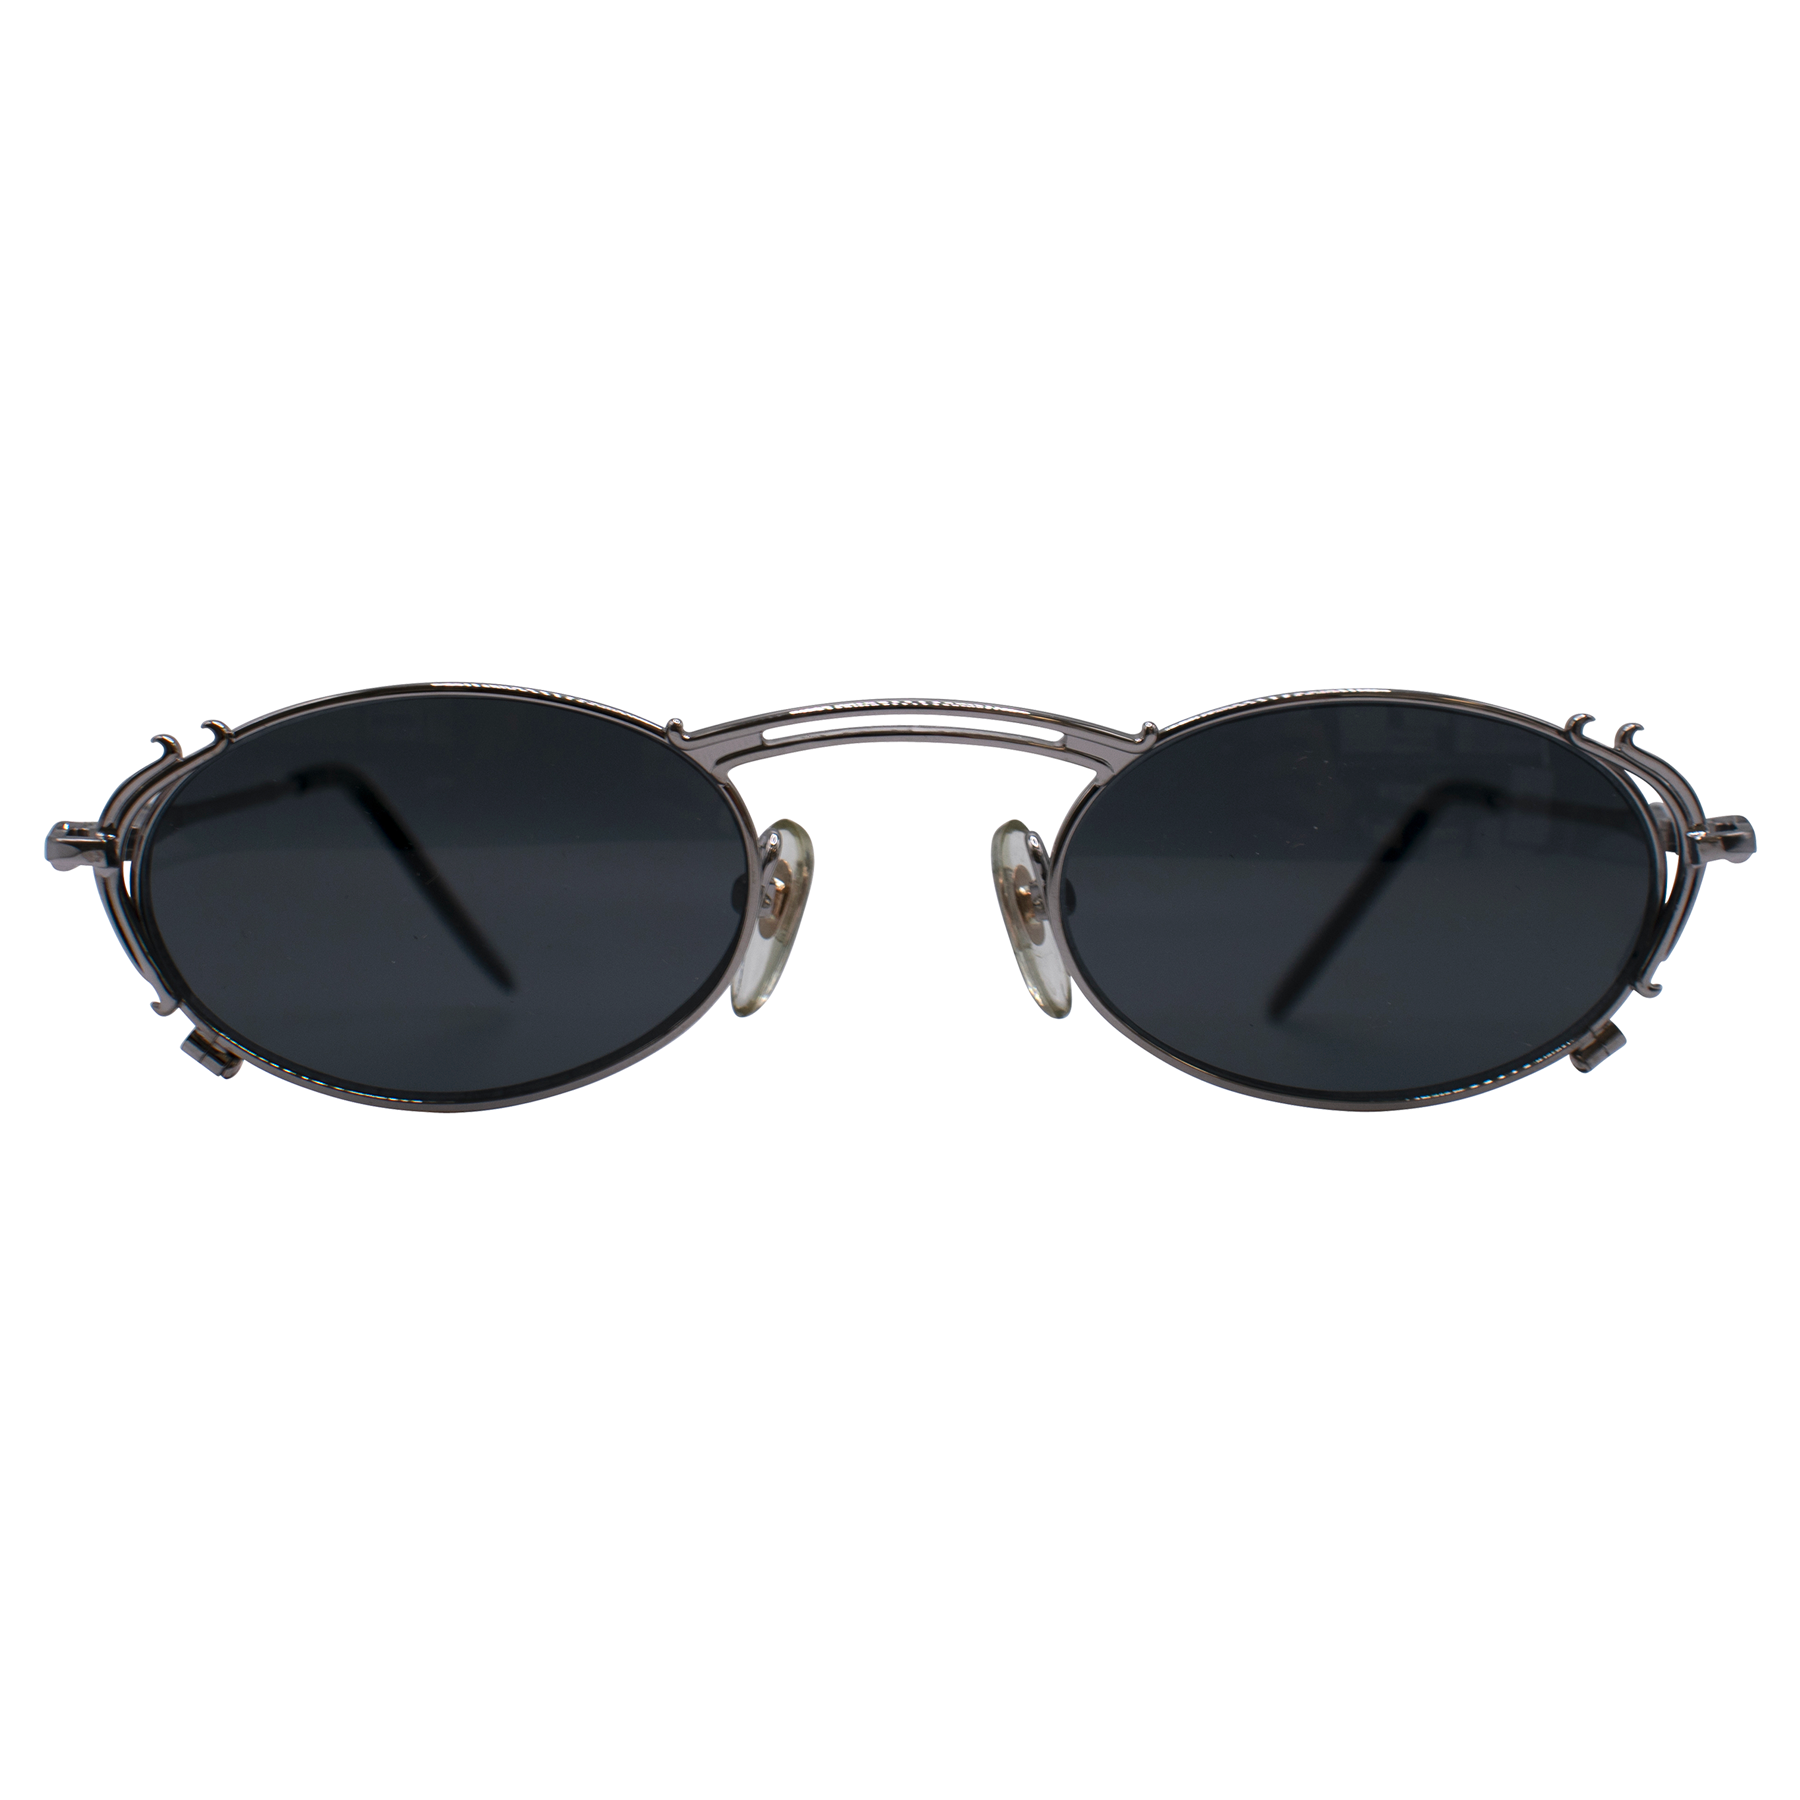 GENTLE Small Oval Sunglasses